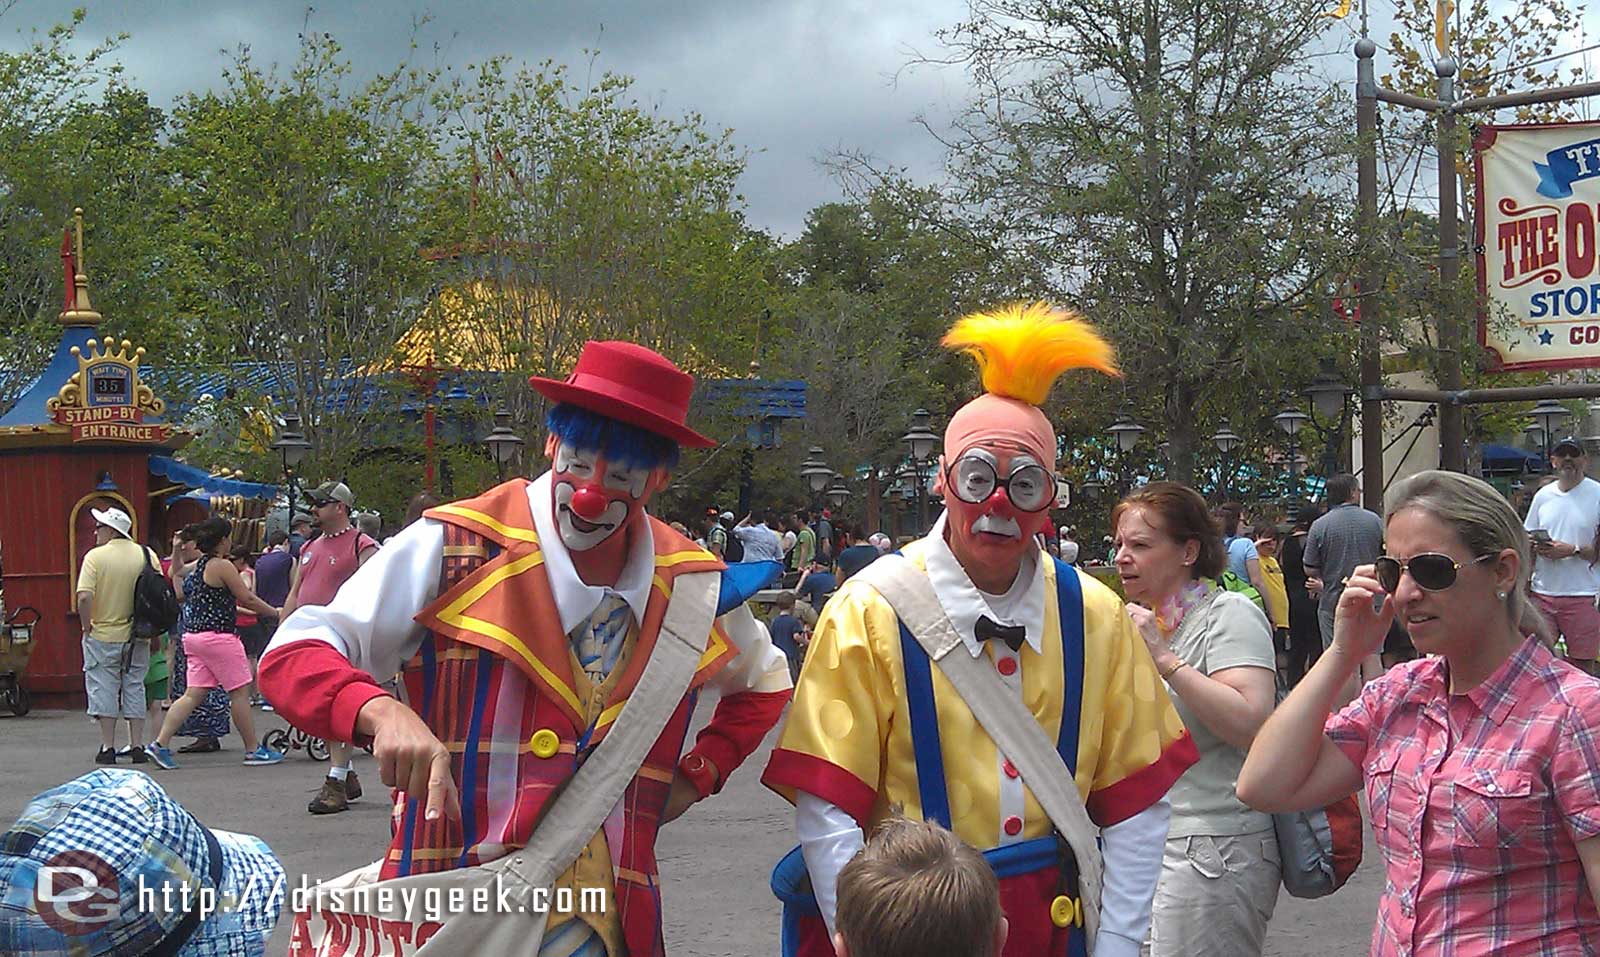 The Giggle Gang out roaming the Storybook Circus